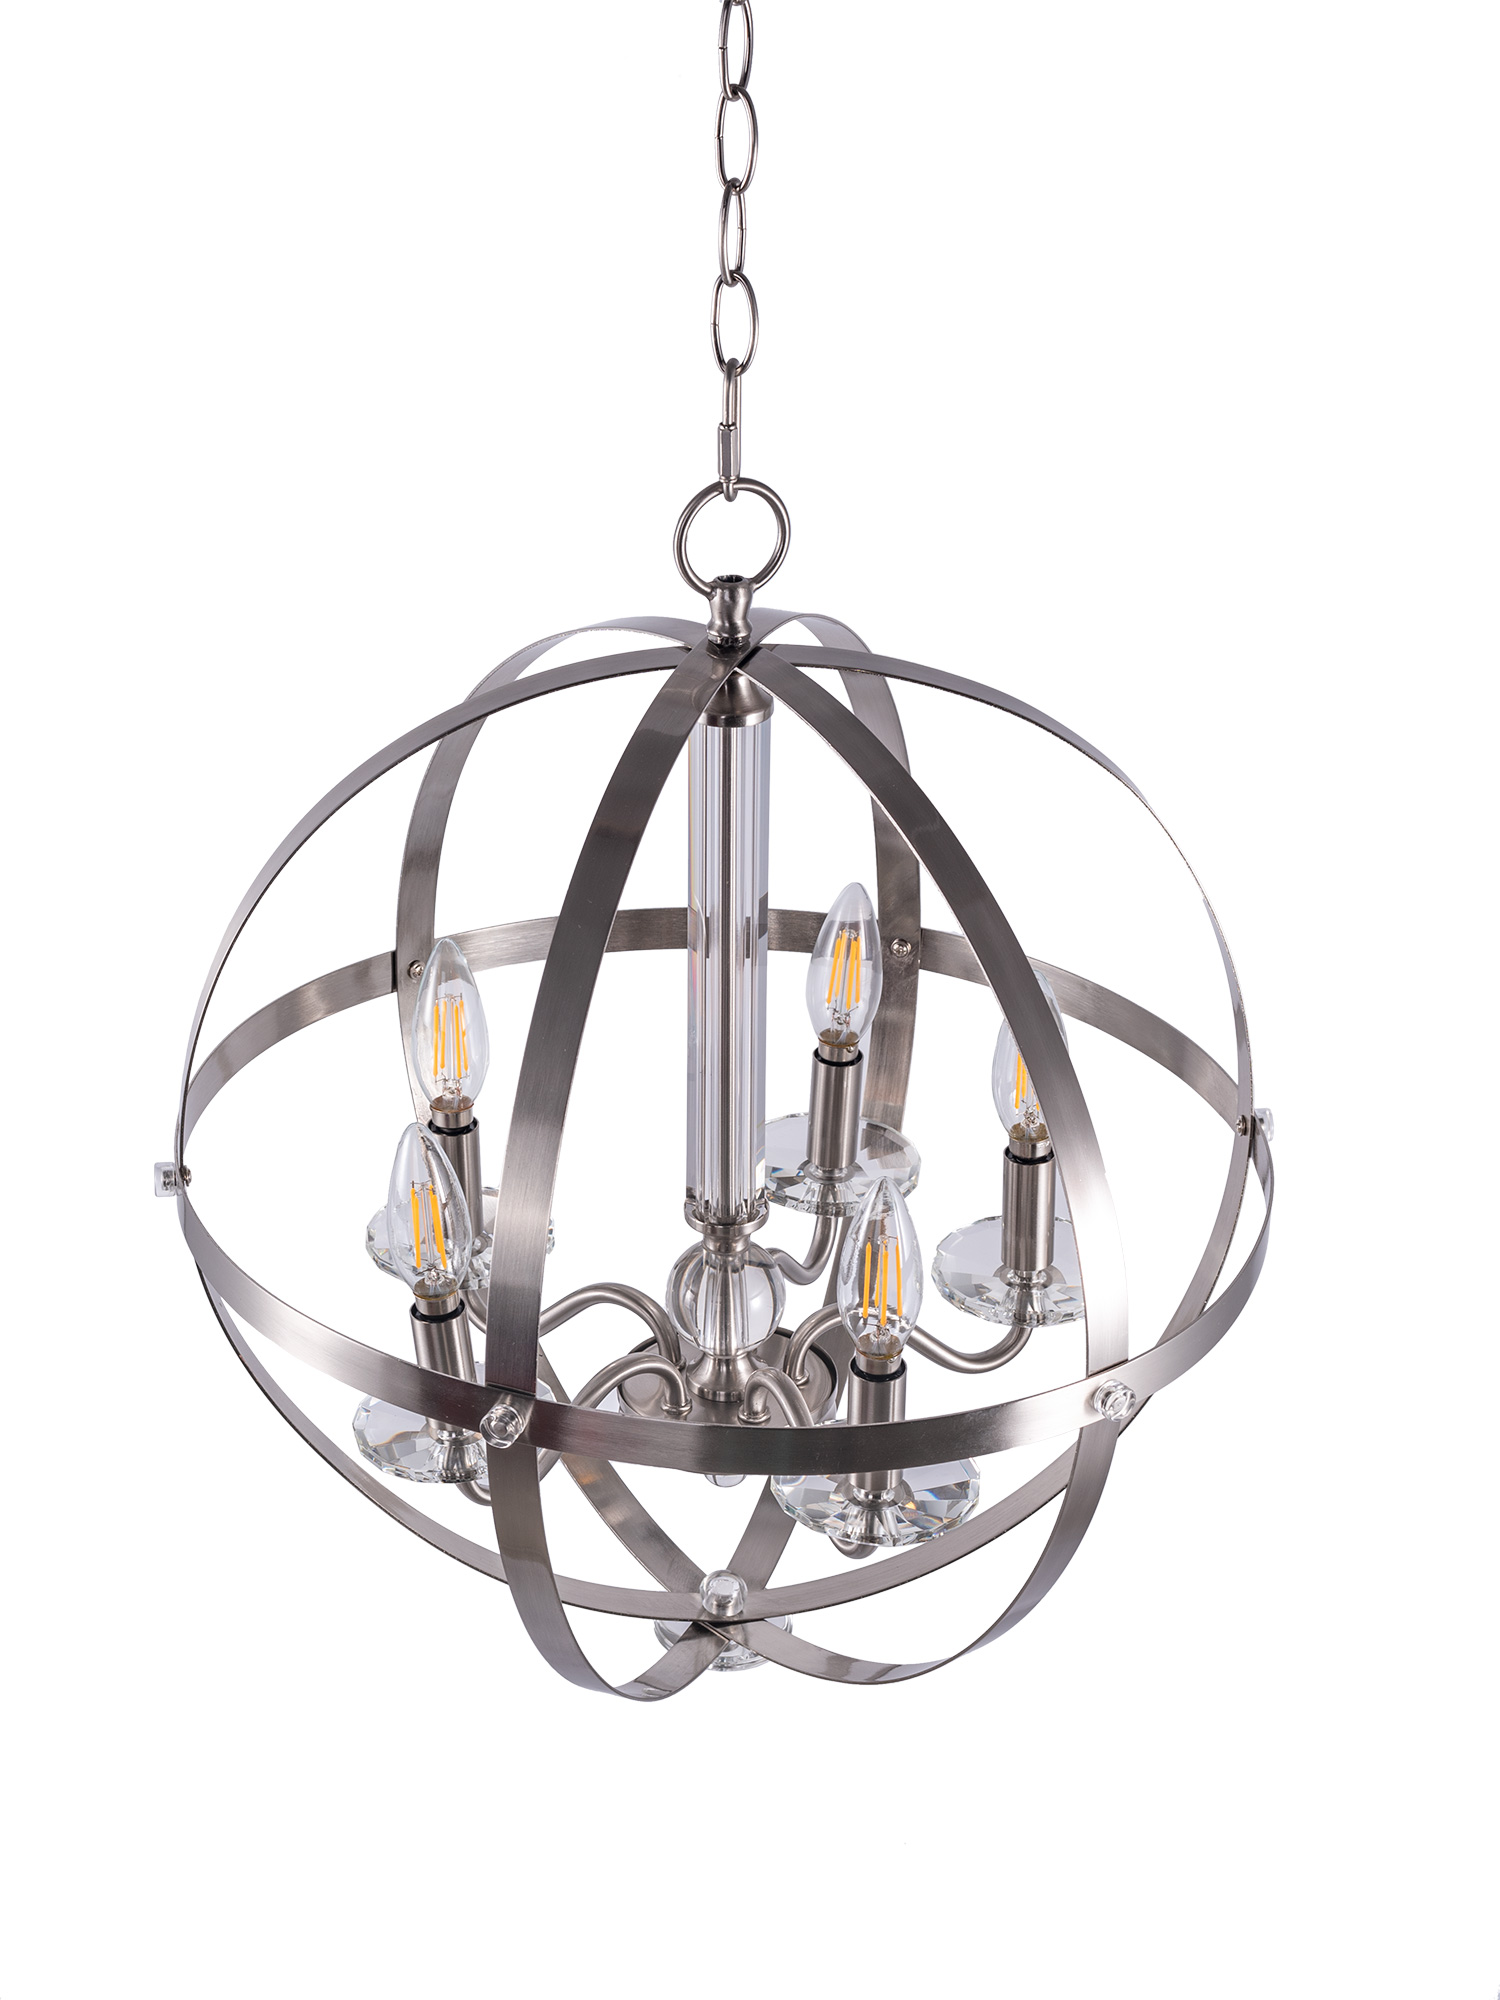 USA-Direct-5-Light-Candle-Style-Globe-Chandelier-Industrial-Rustic-Indoor-Pendant-Light-Without-Bulb-1877125-8